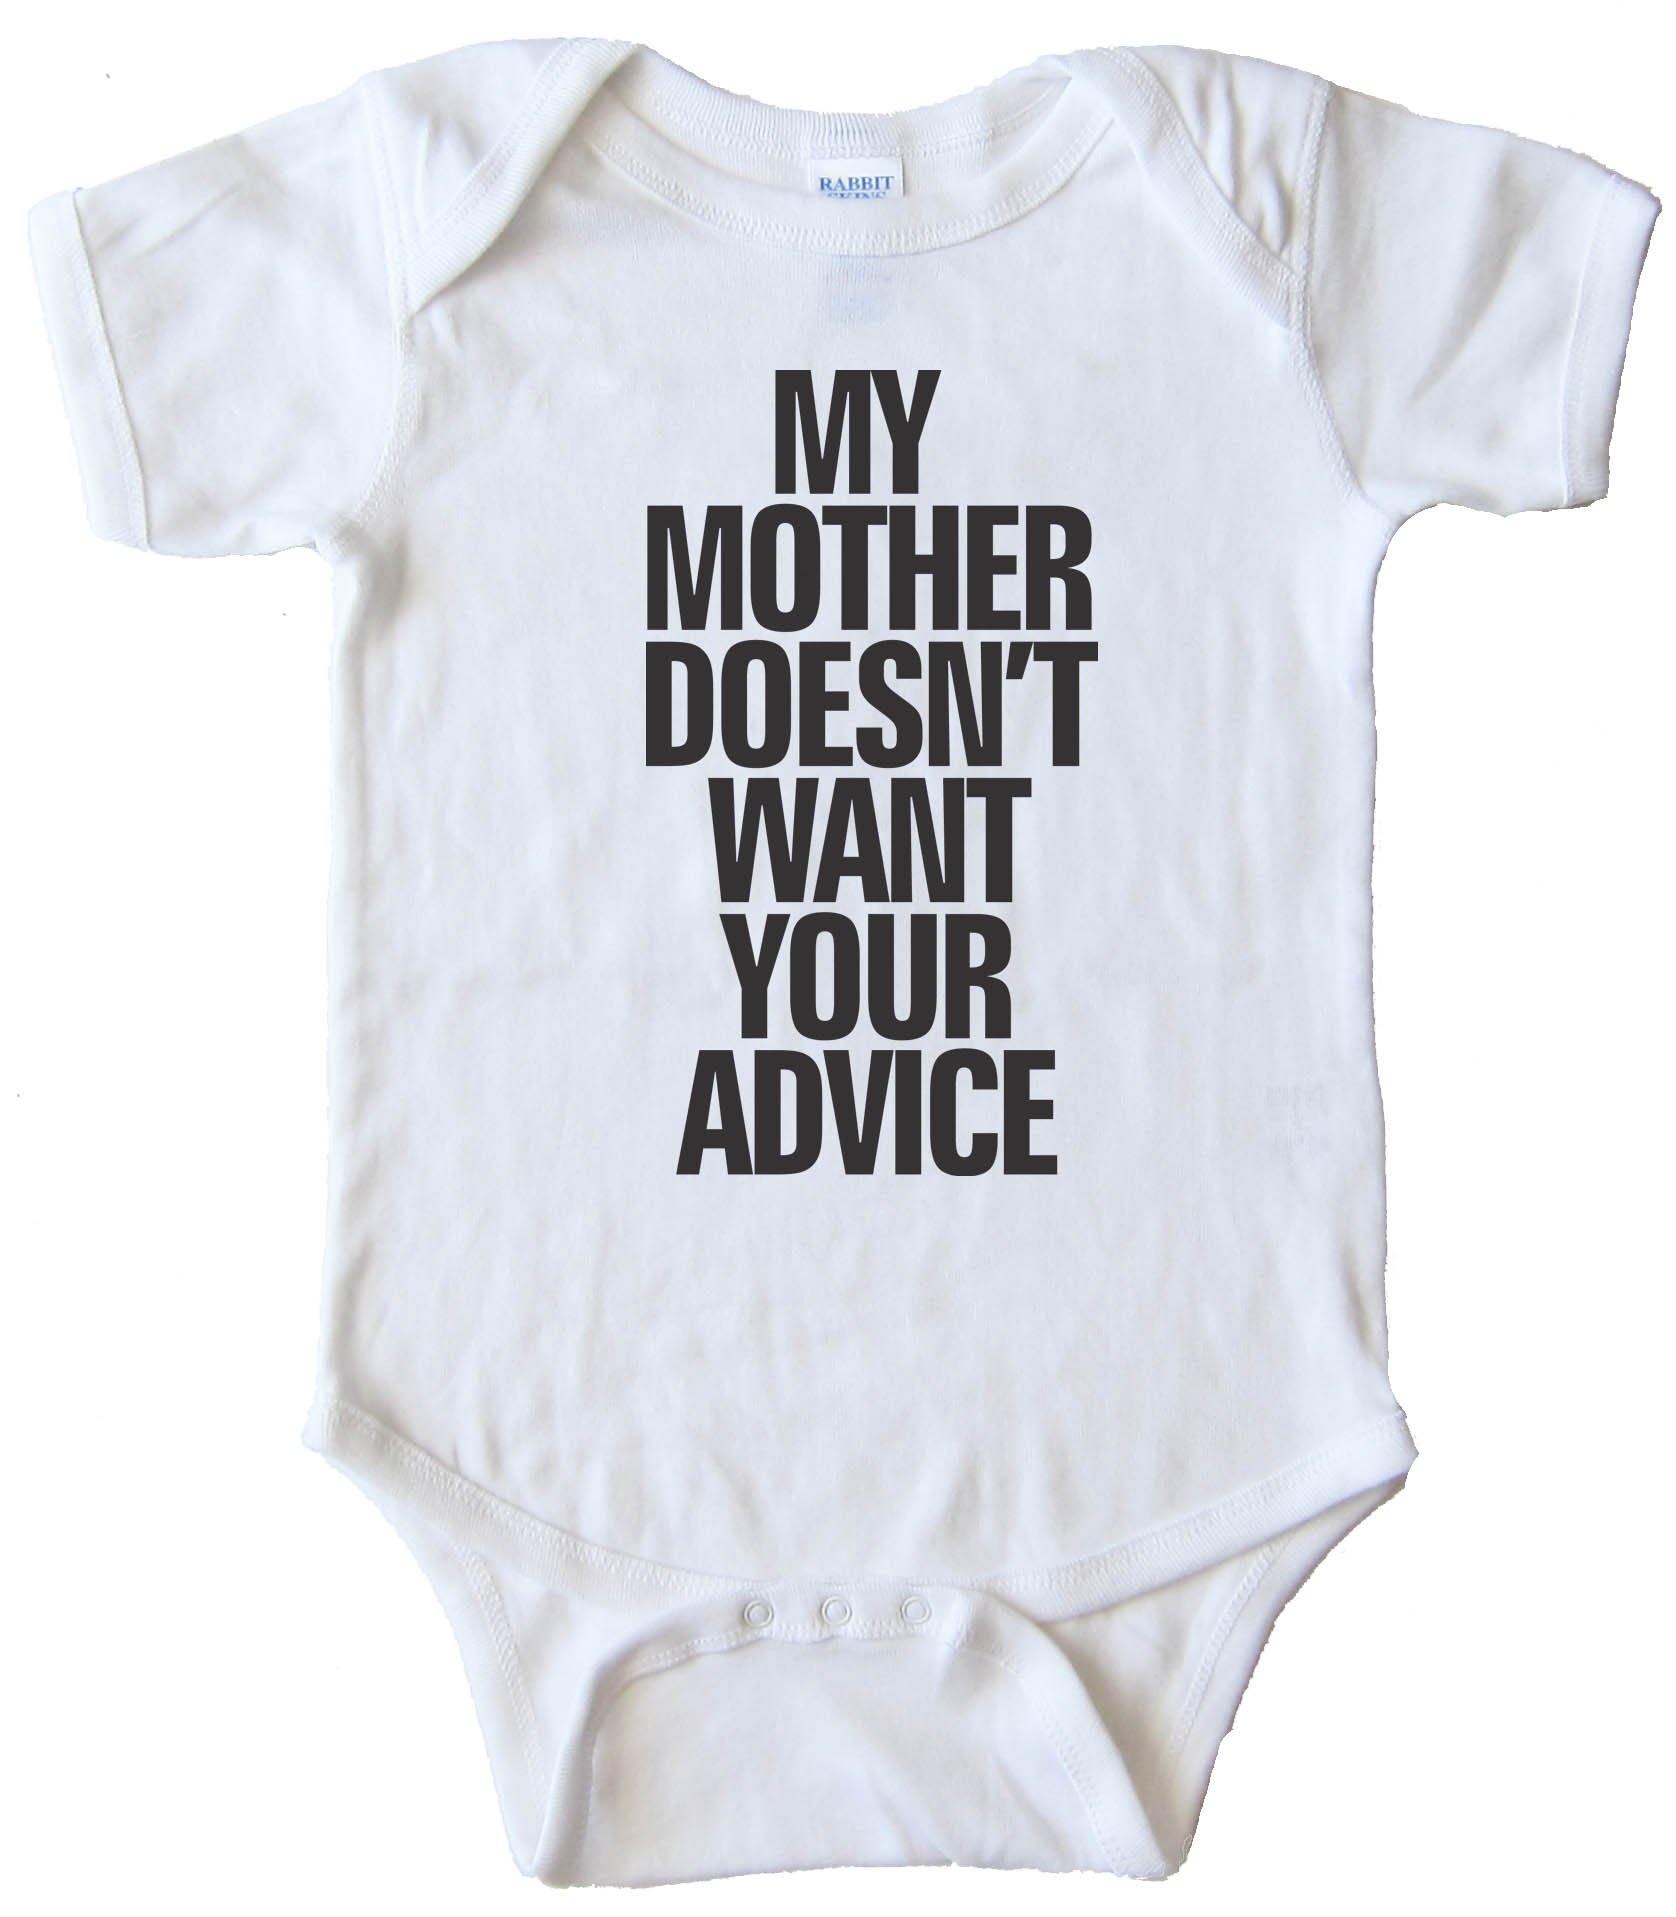 My Mother Doesn'T Want Your Advice - Baby Bodysuit